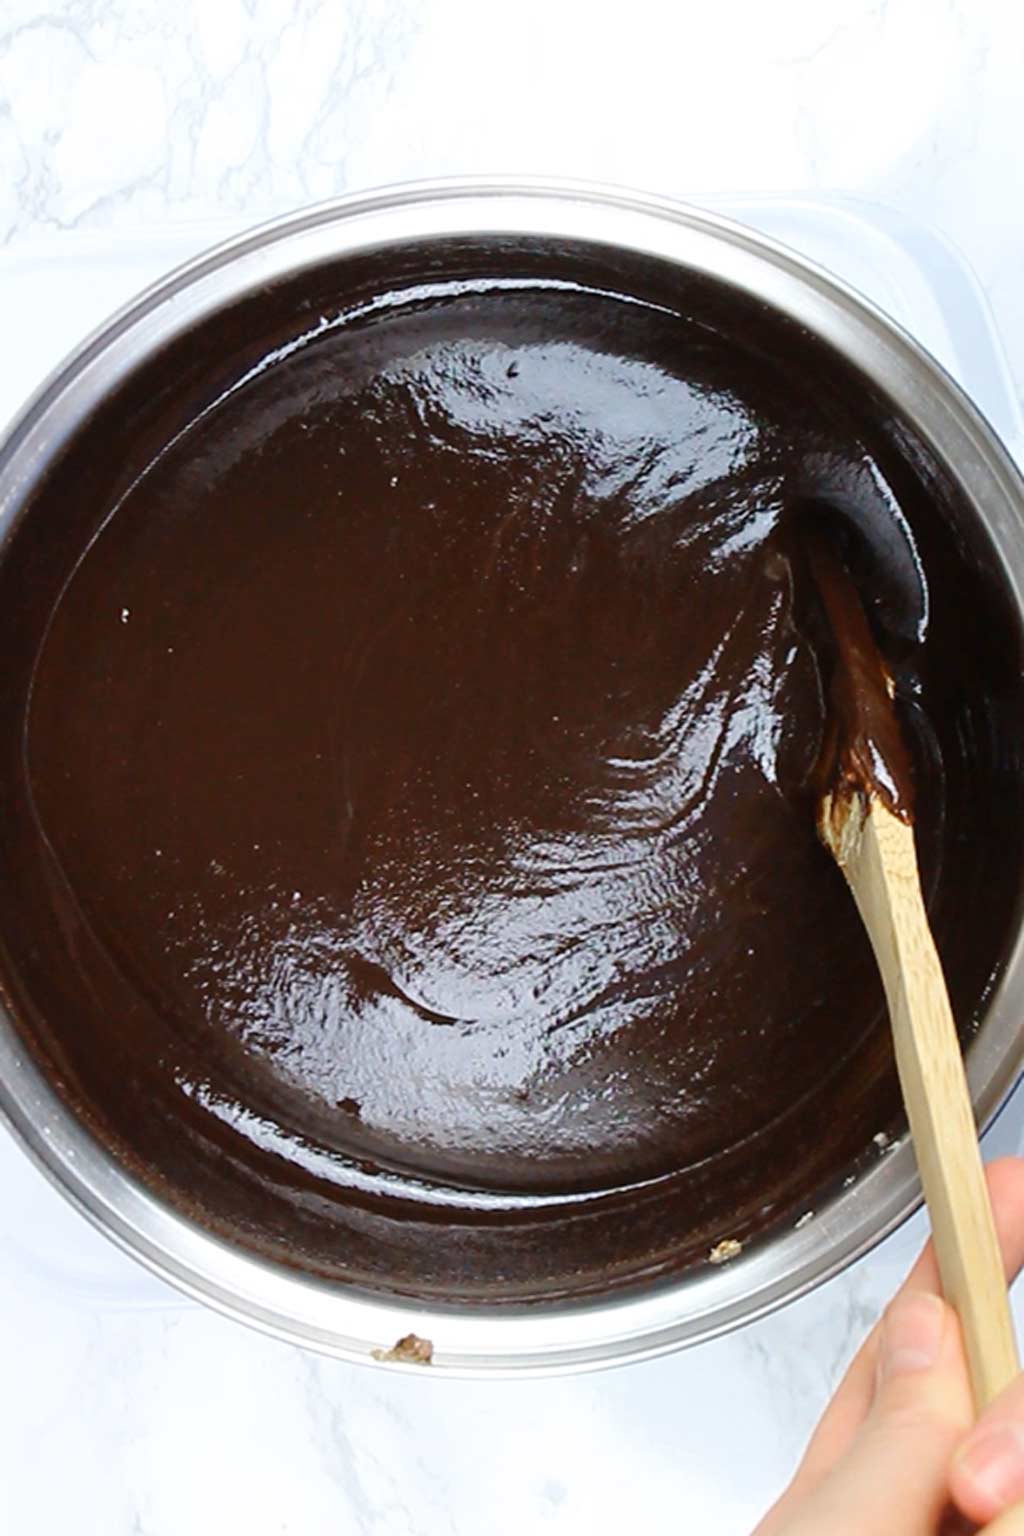 melted chocolate mixture in a pot